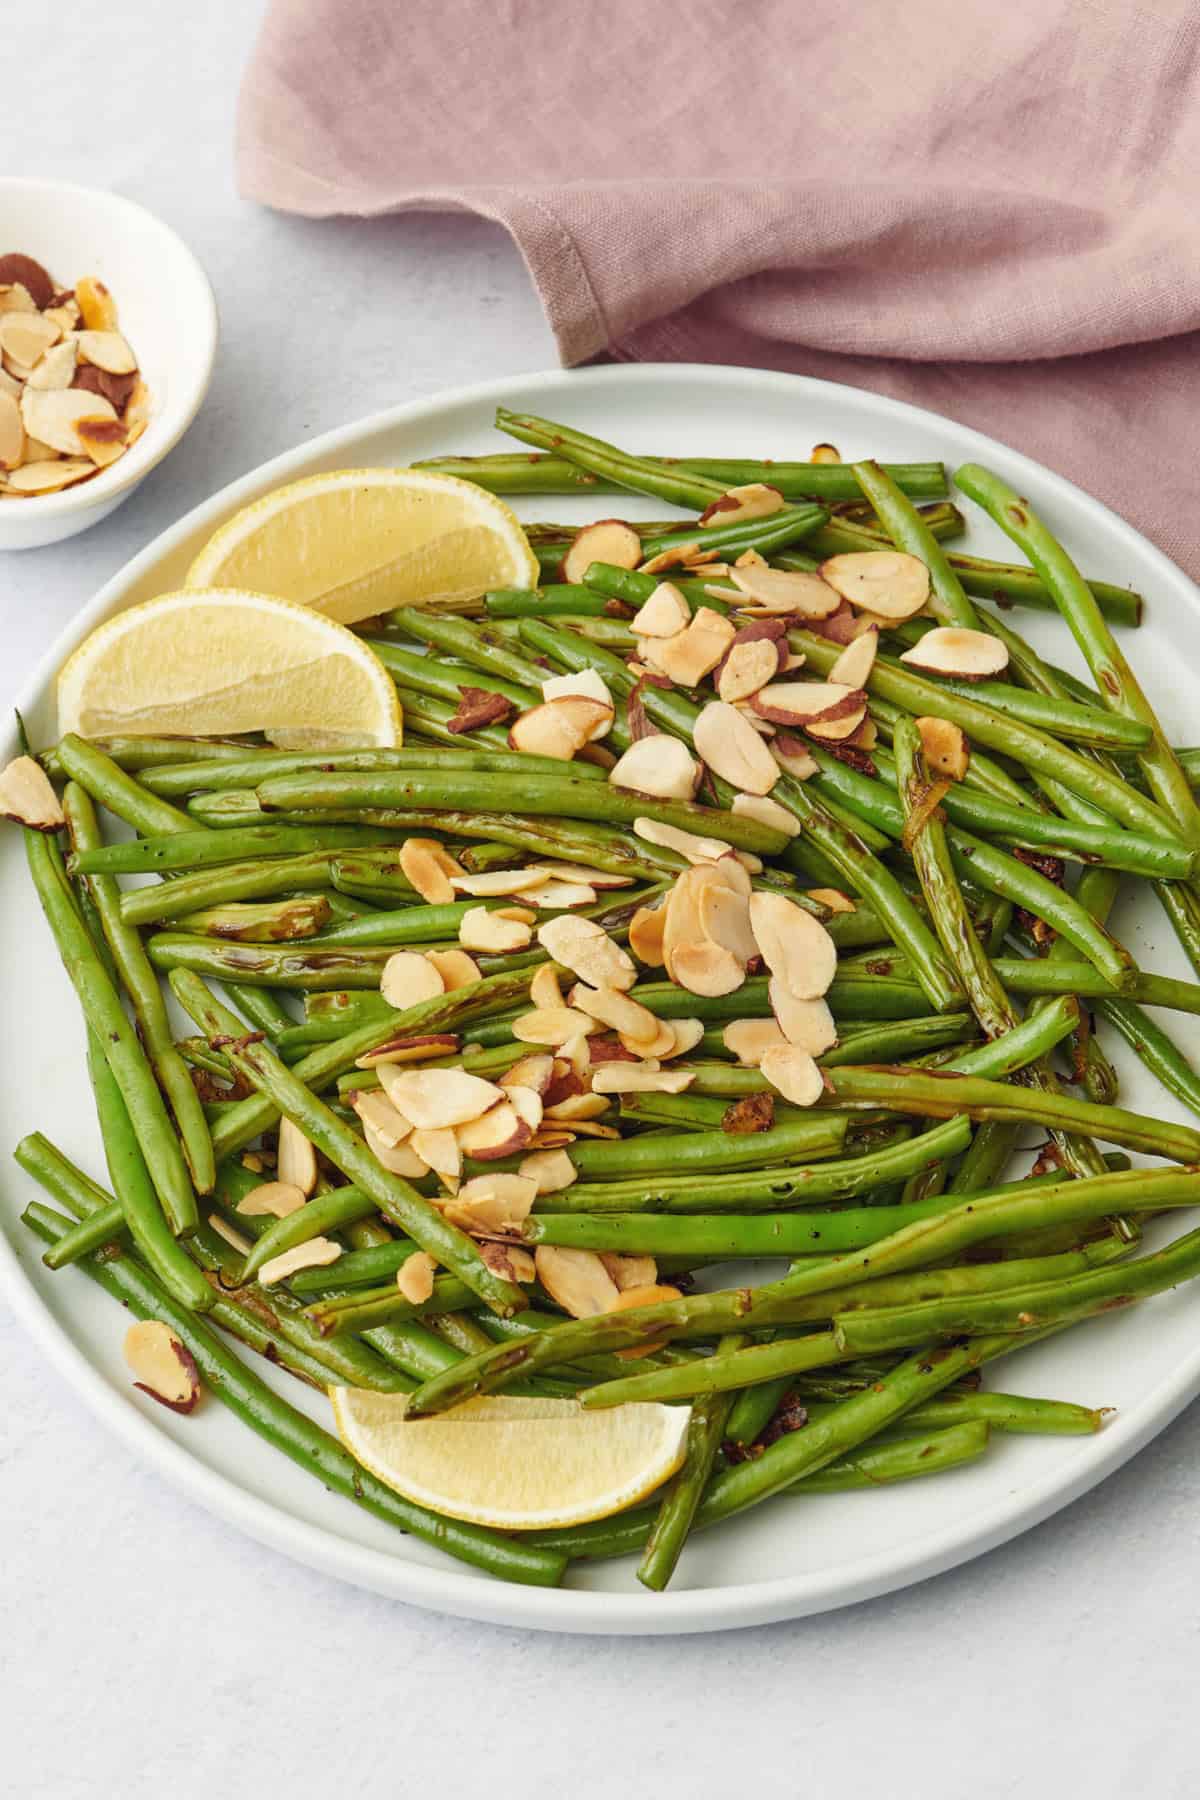 Large plate of green beans with almonds - Thanksgiving side dish